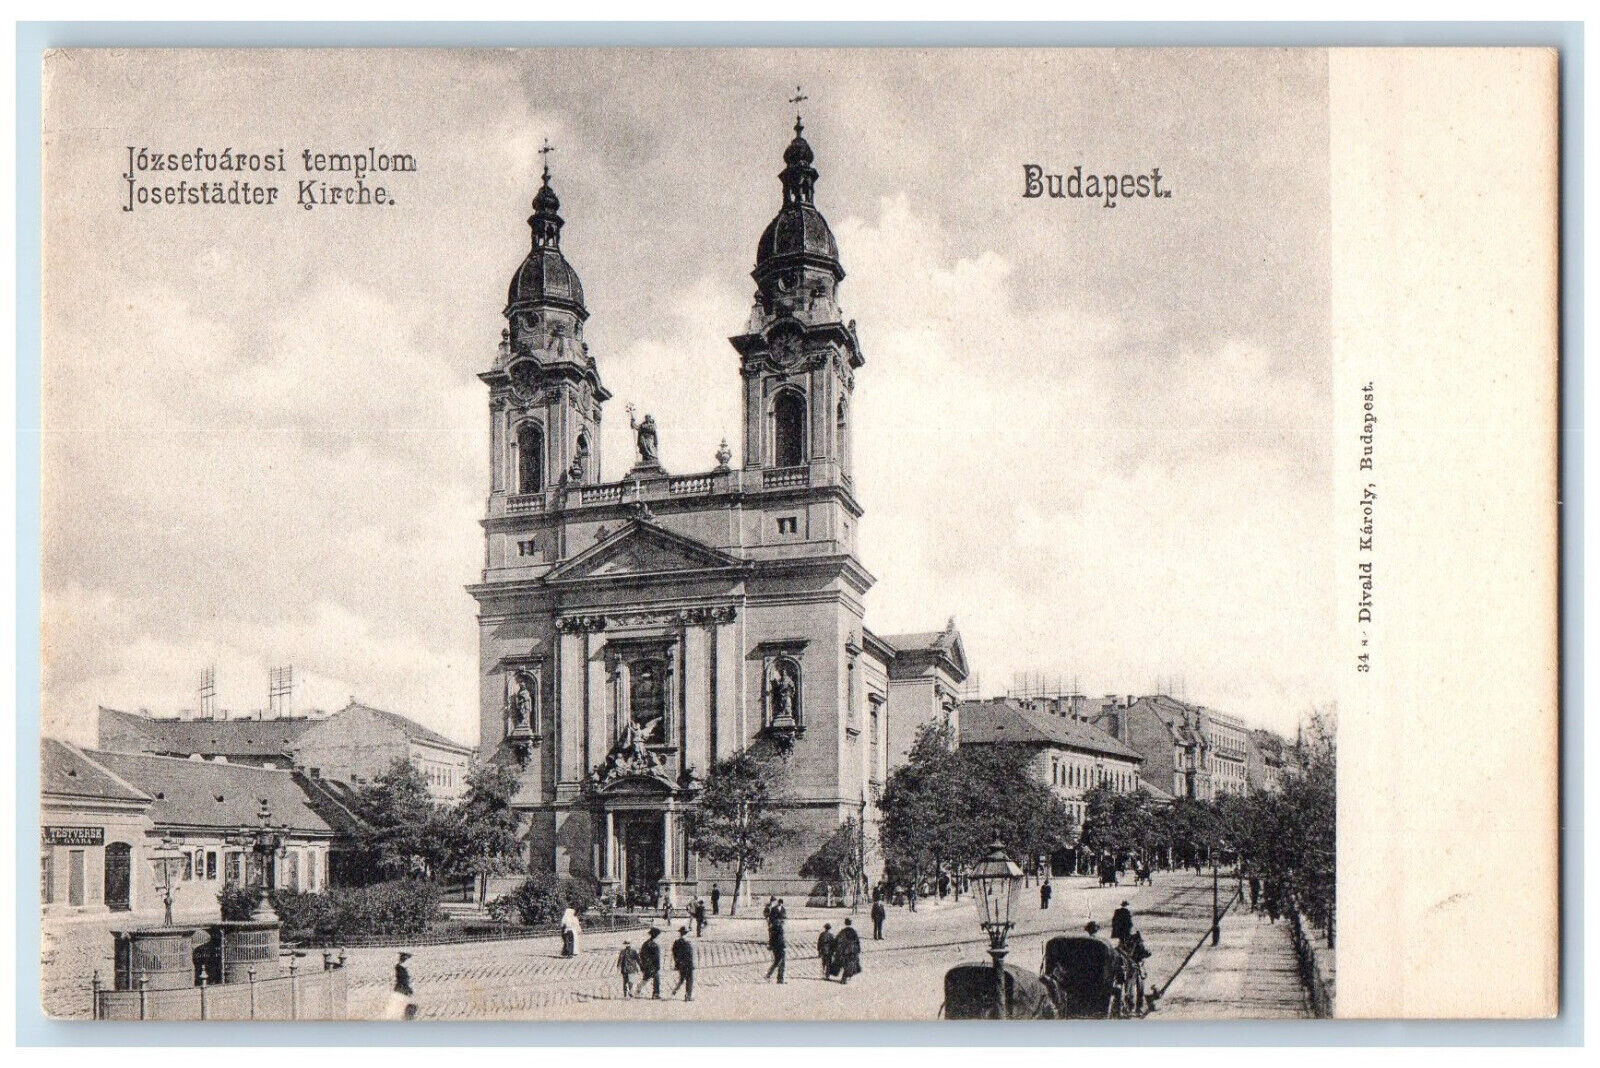 Budapest Hungary Postcard Josefstadt Church Road View c1905 Unposted Antique